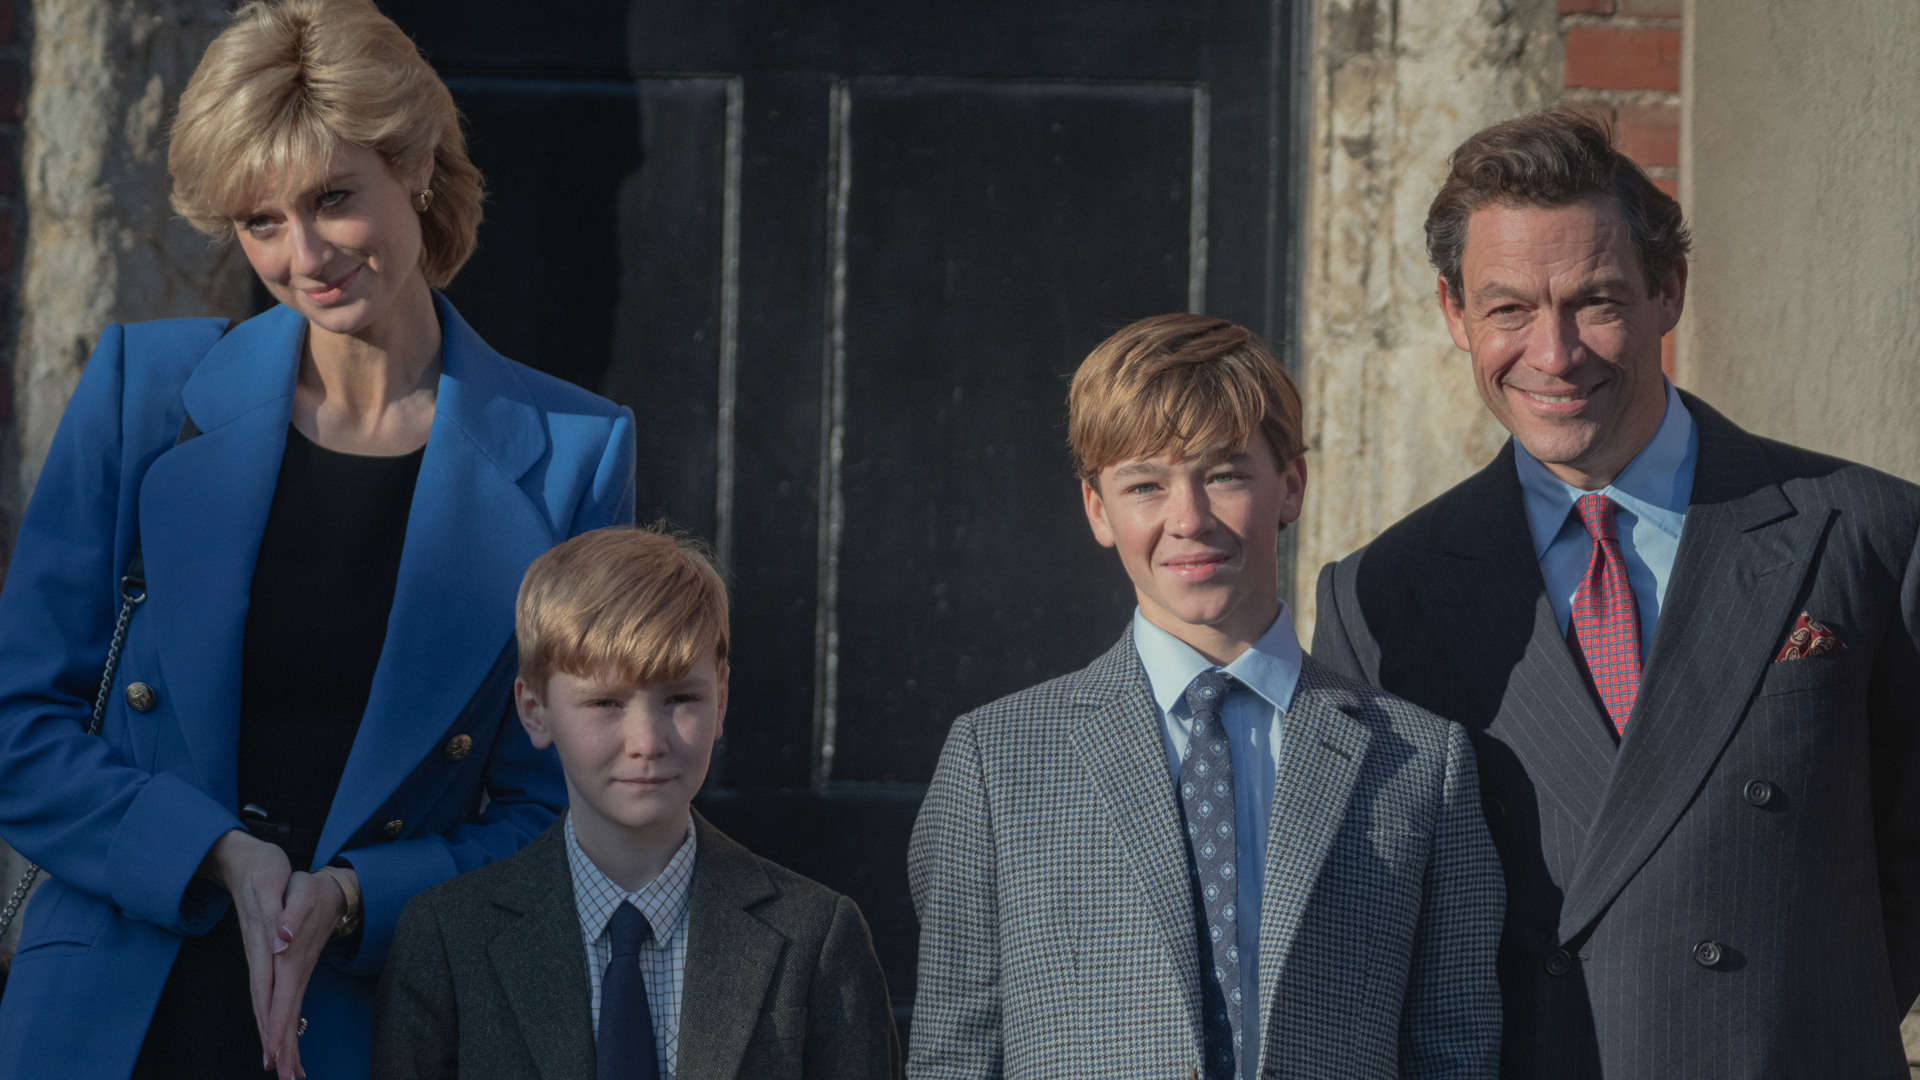 Prince Charles, Princess Diana, Prince William, and Prince Harry pose for photographs in The Crown season 5